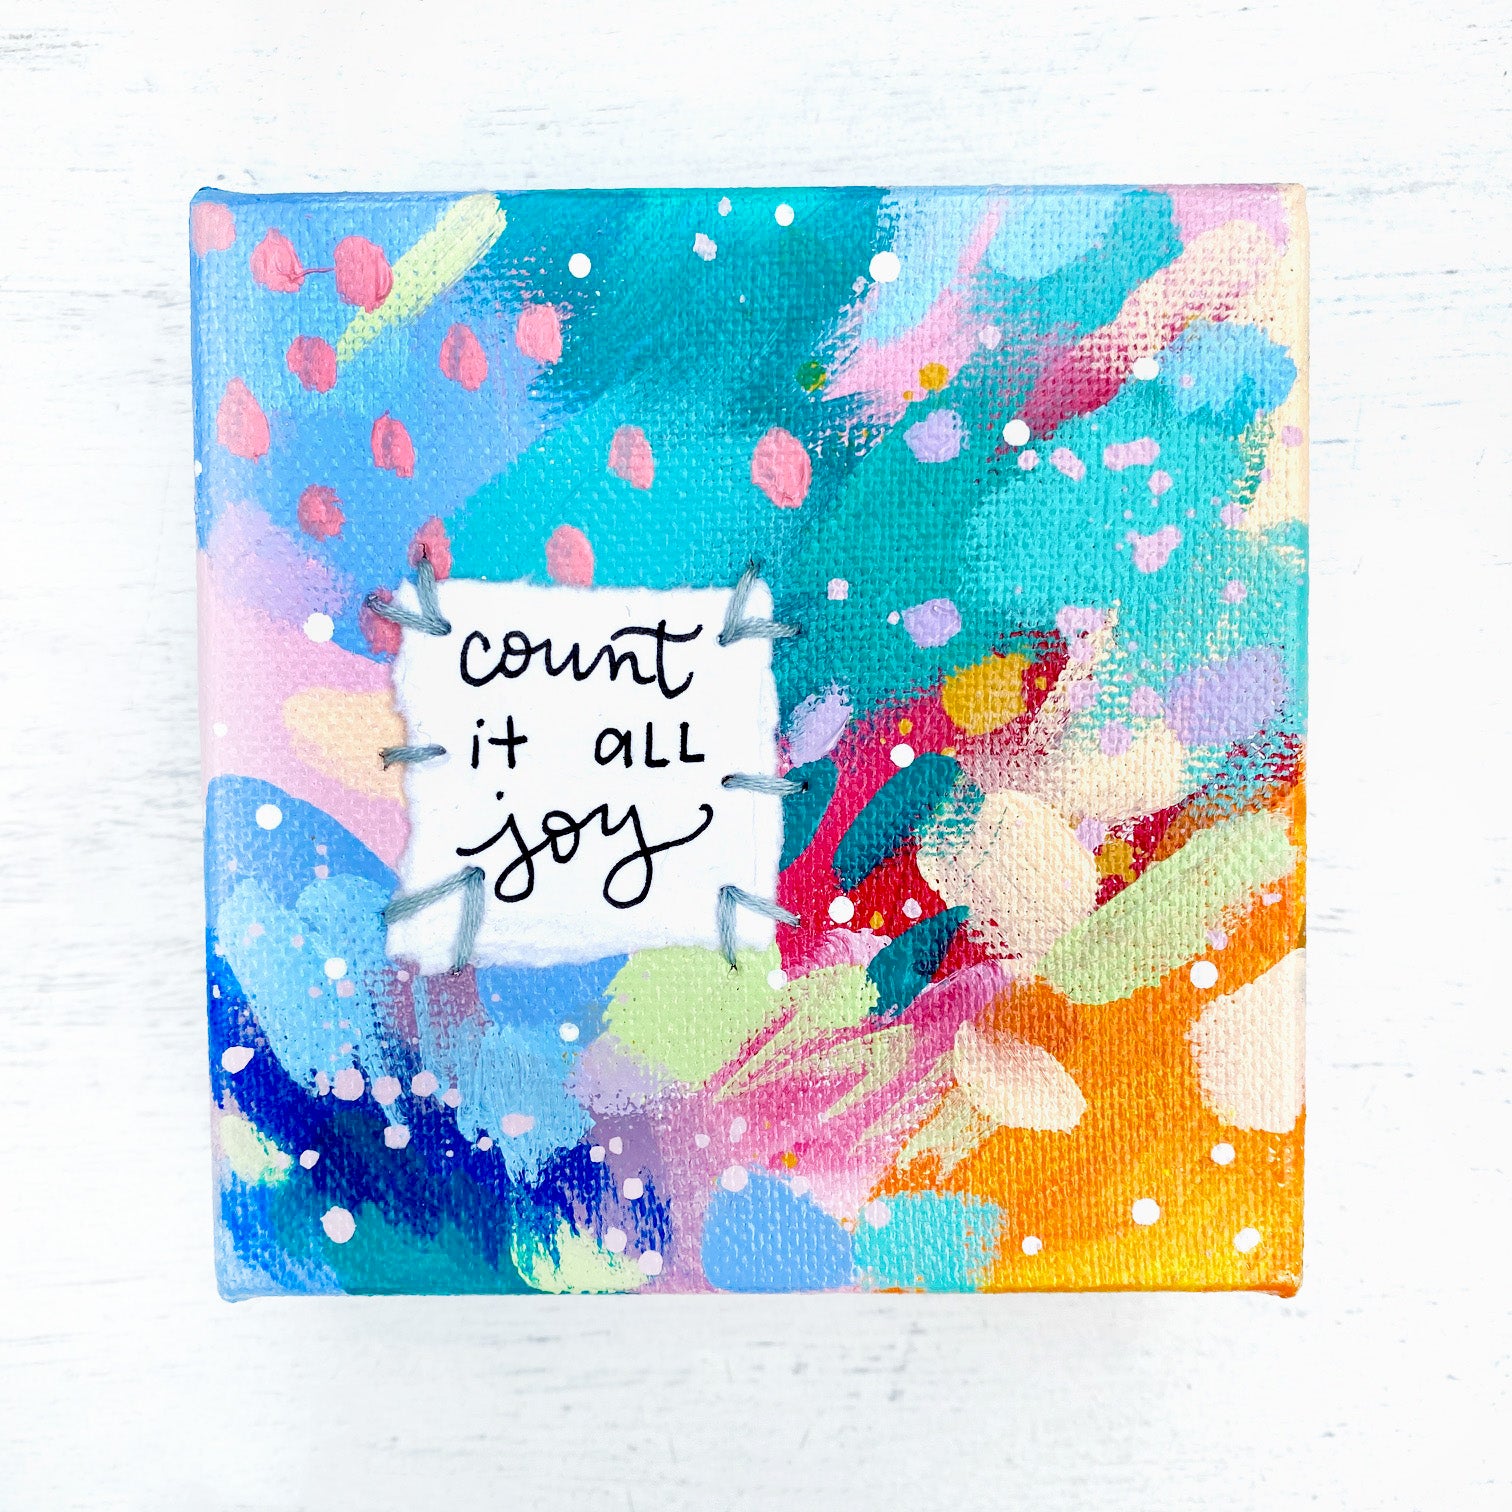 Count it all Joy 4x4 inch original abstract canvas with embroidery thread accents - Bethany Joy Art